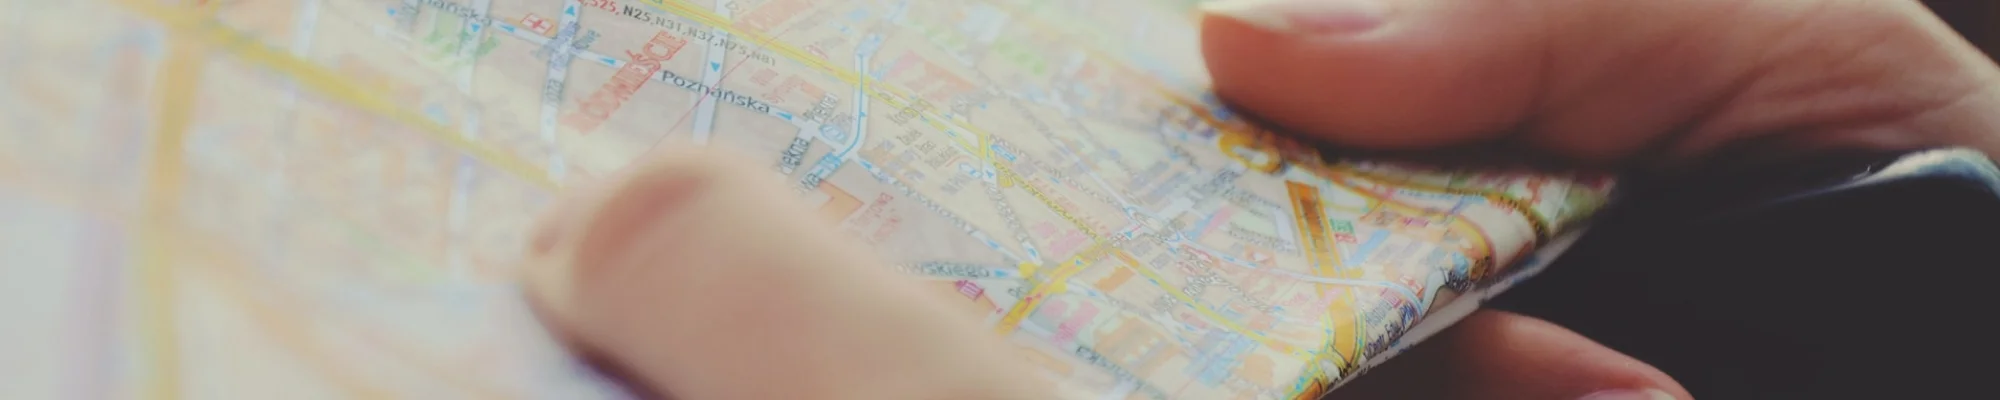 person holding a map in their hands